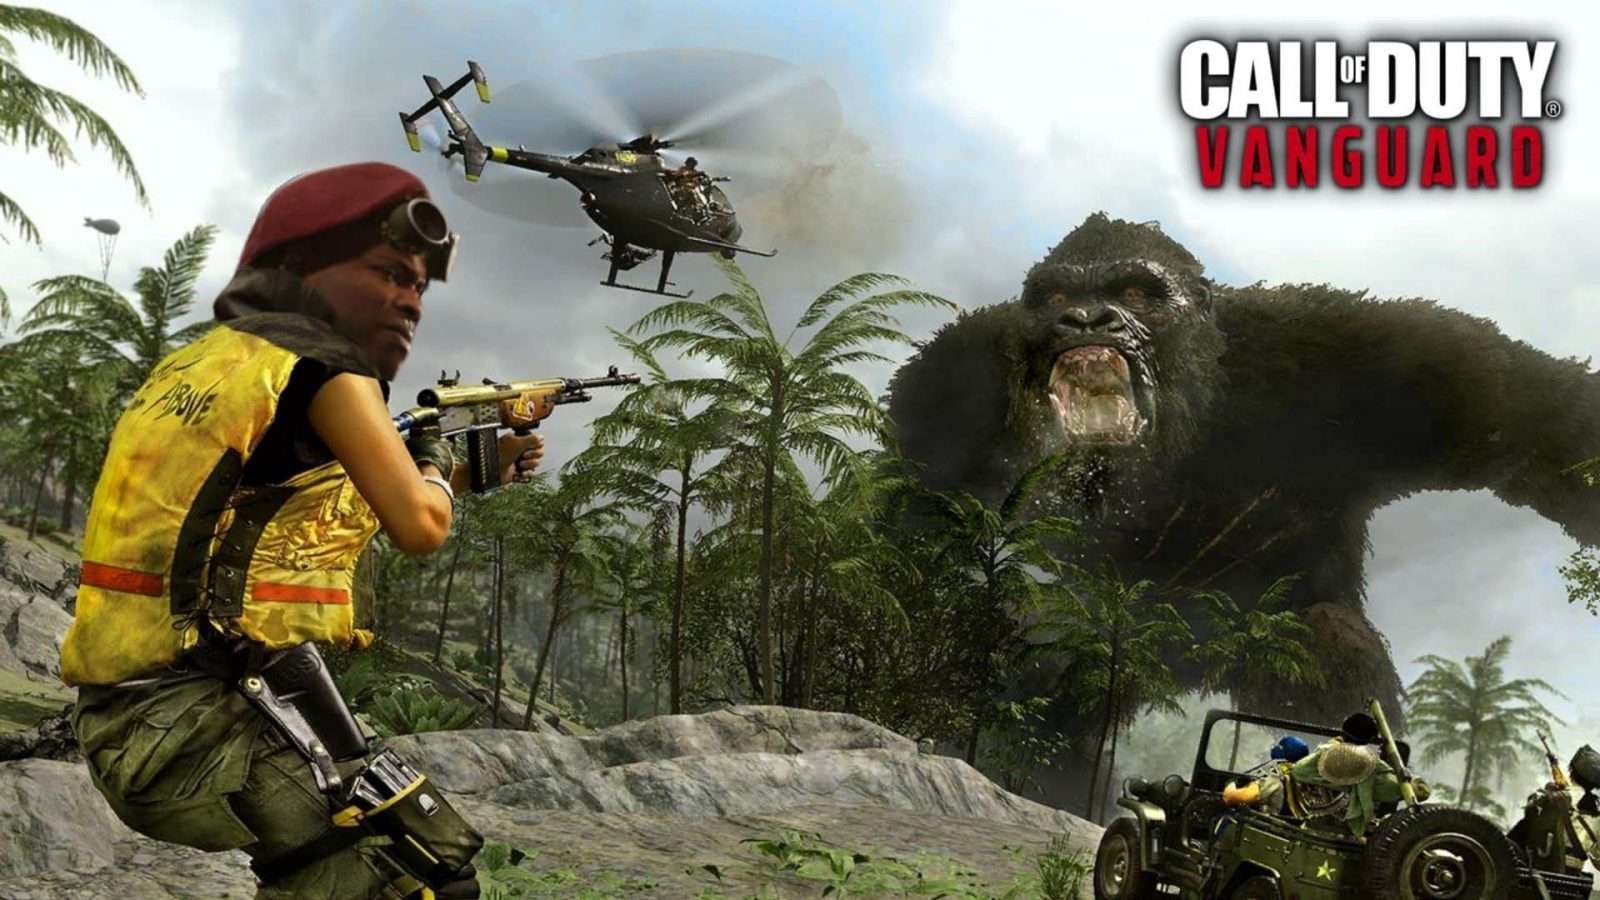 arthur kingsley being shouted at by king kong in cod